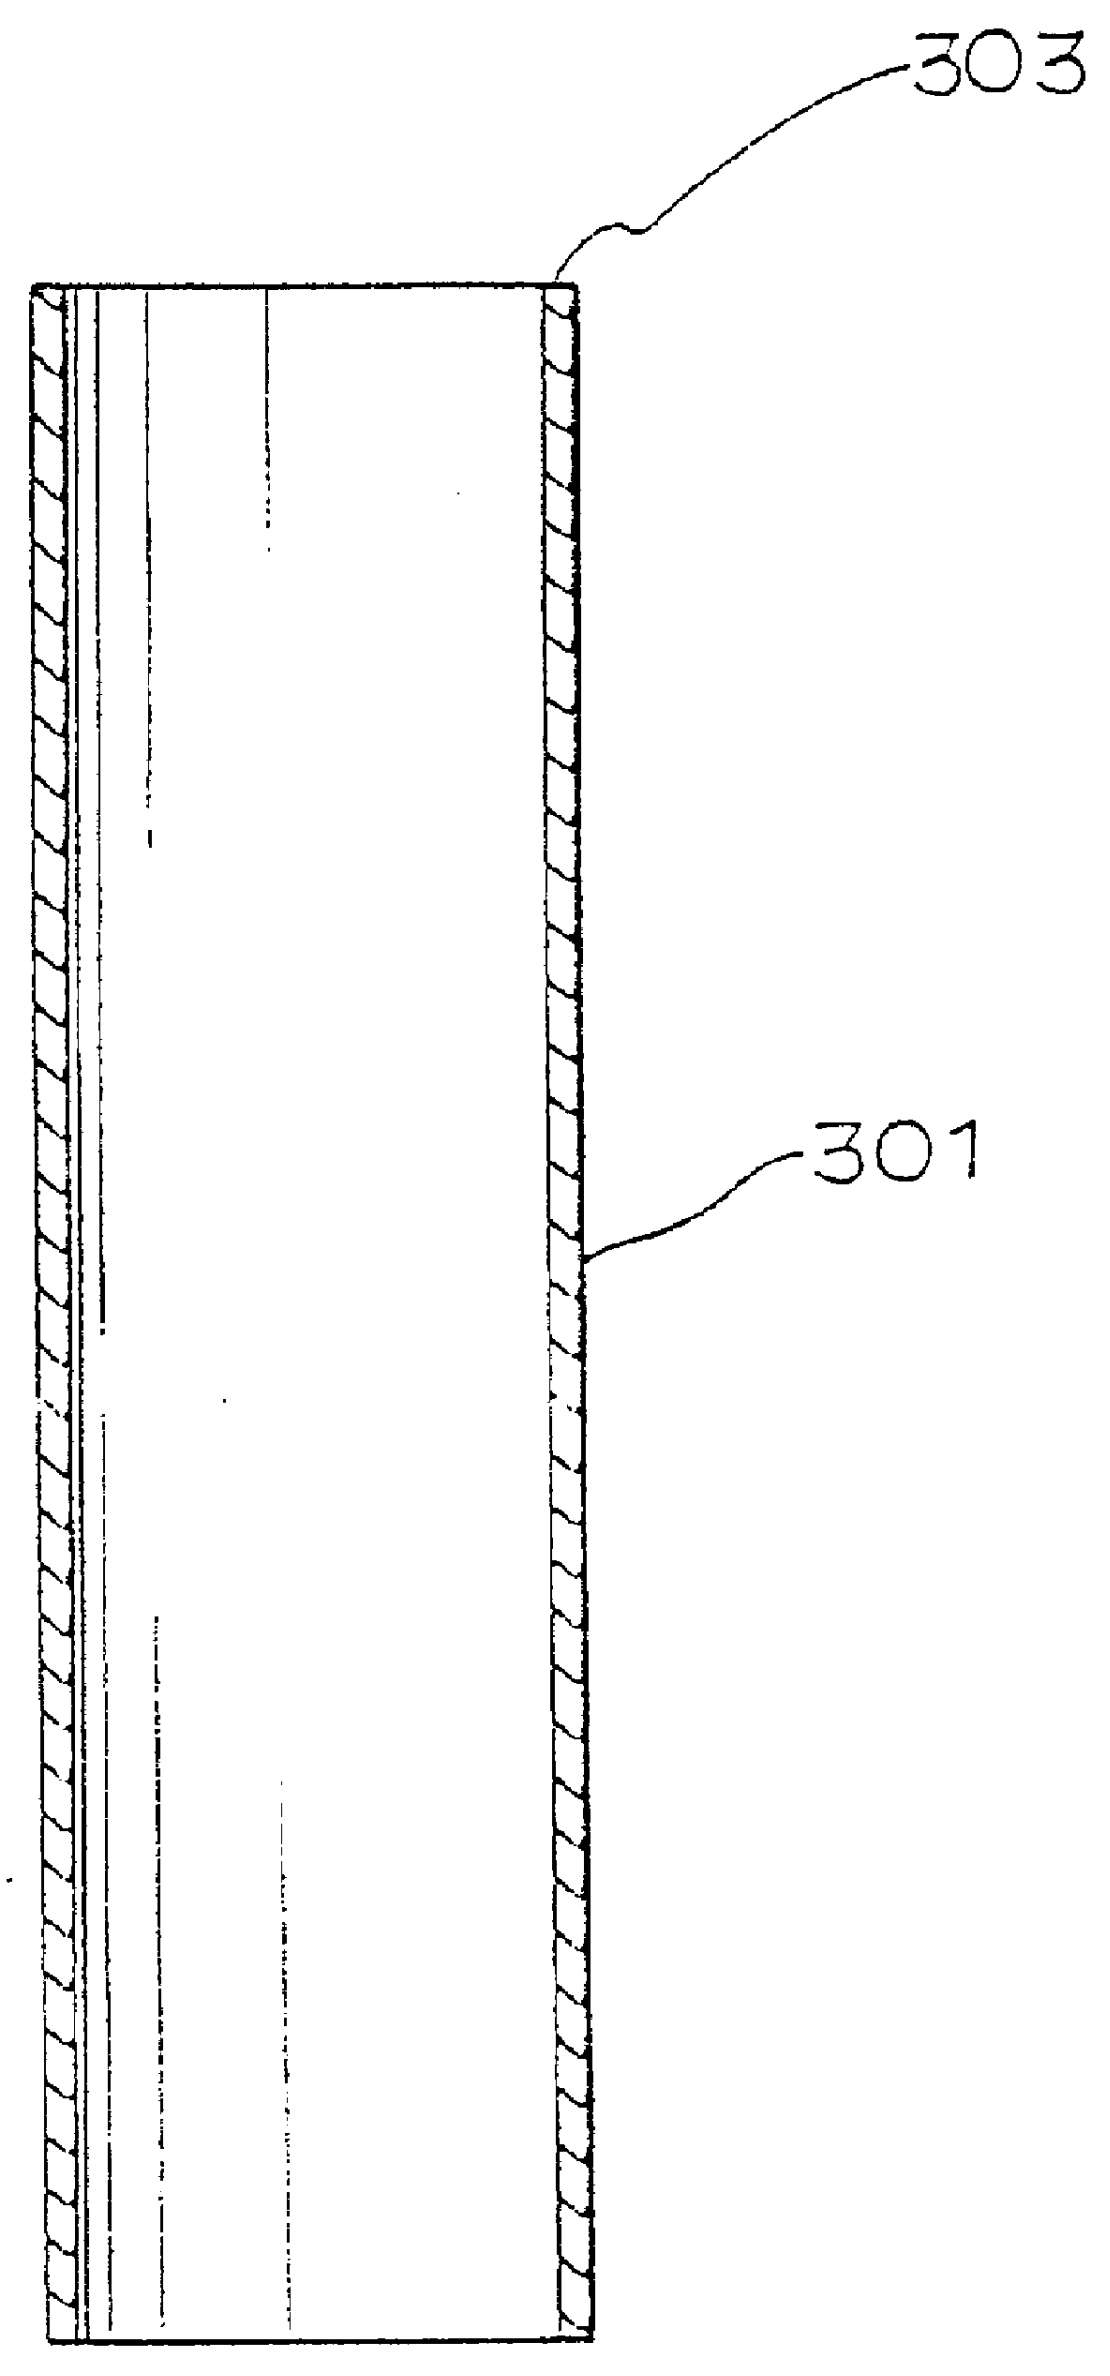 Method for manufacturing an water hammer arrester